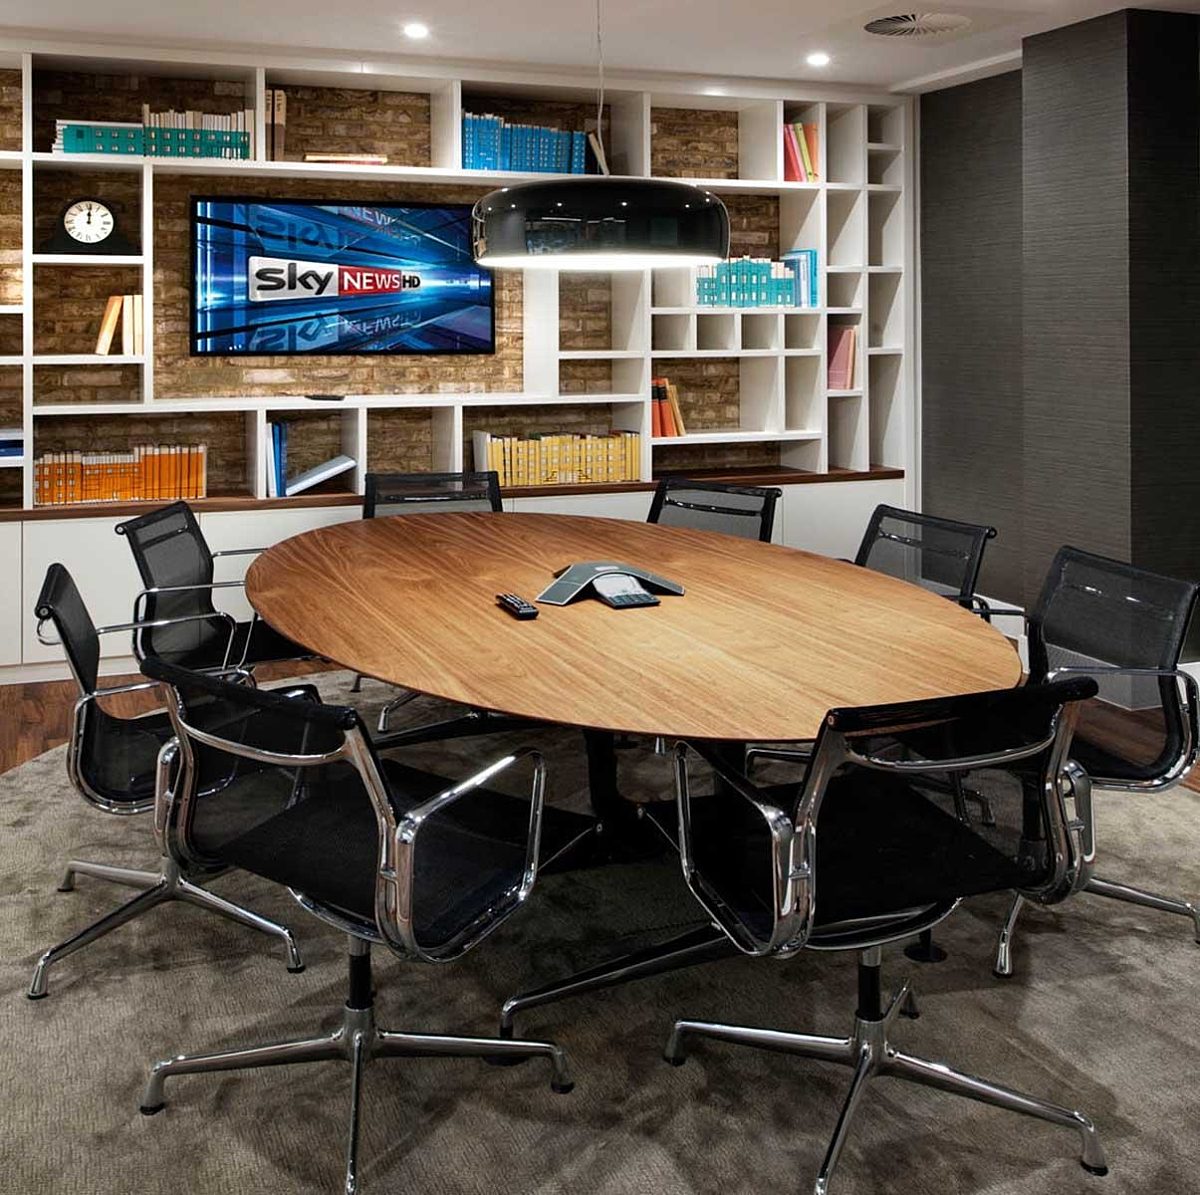 Nuffield boardroom design with bookshelves and tech